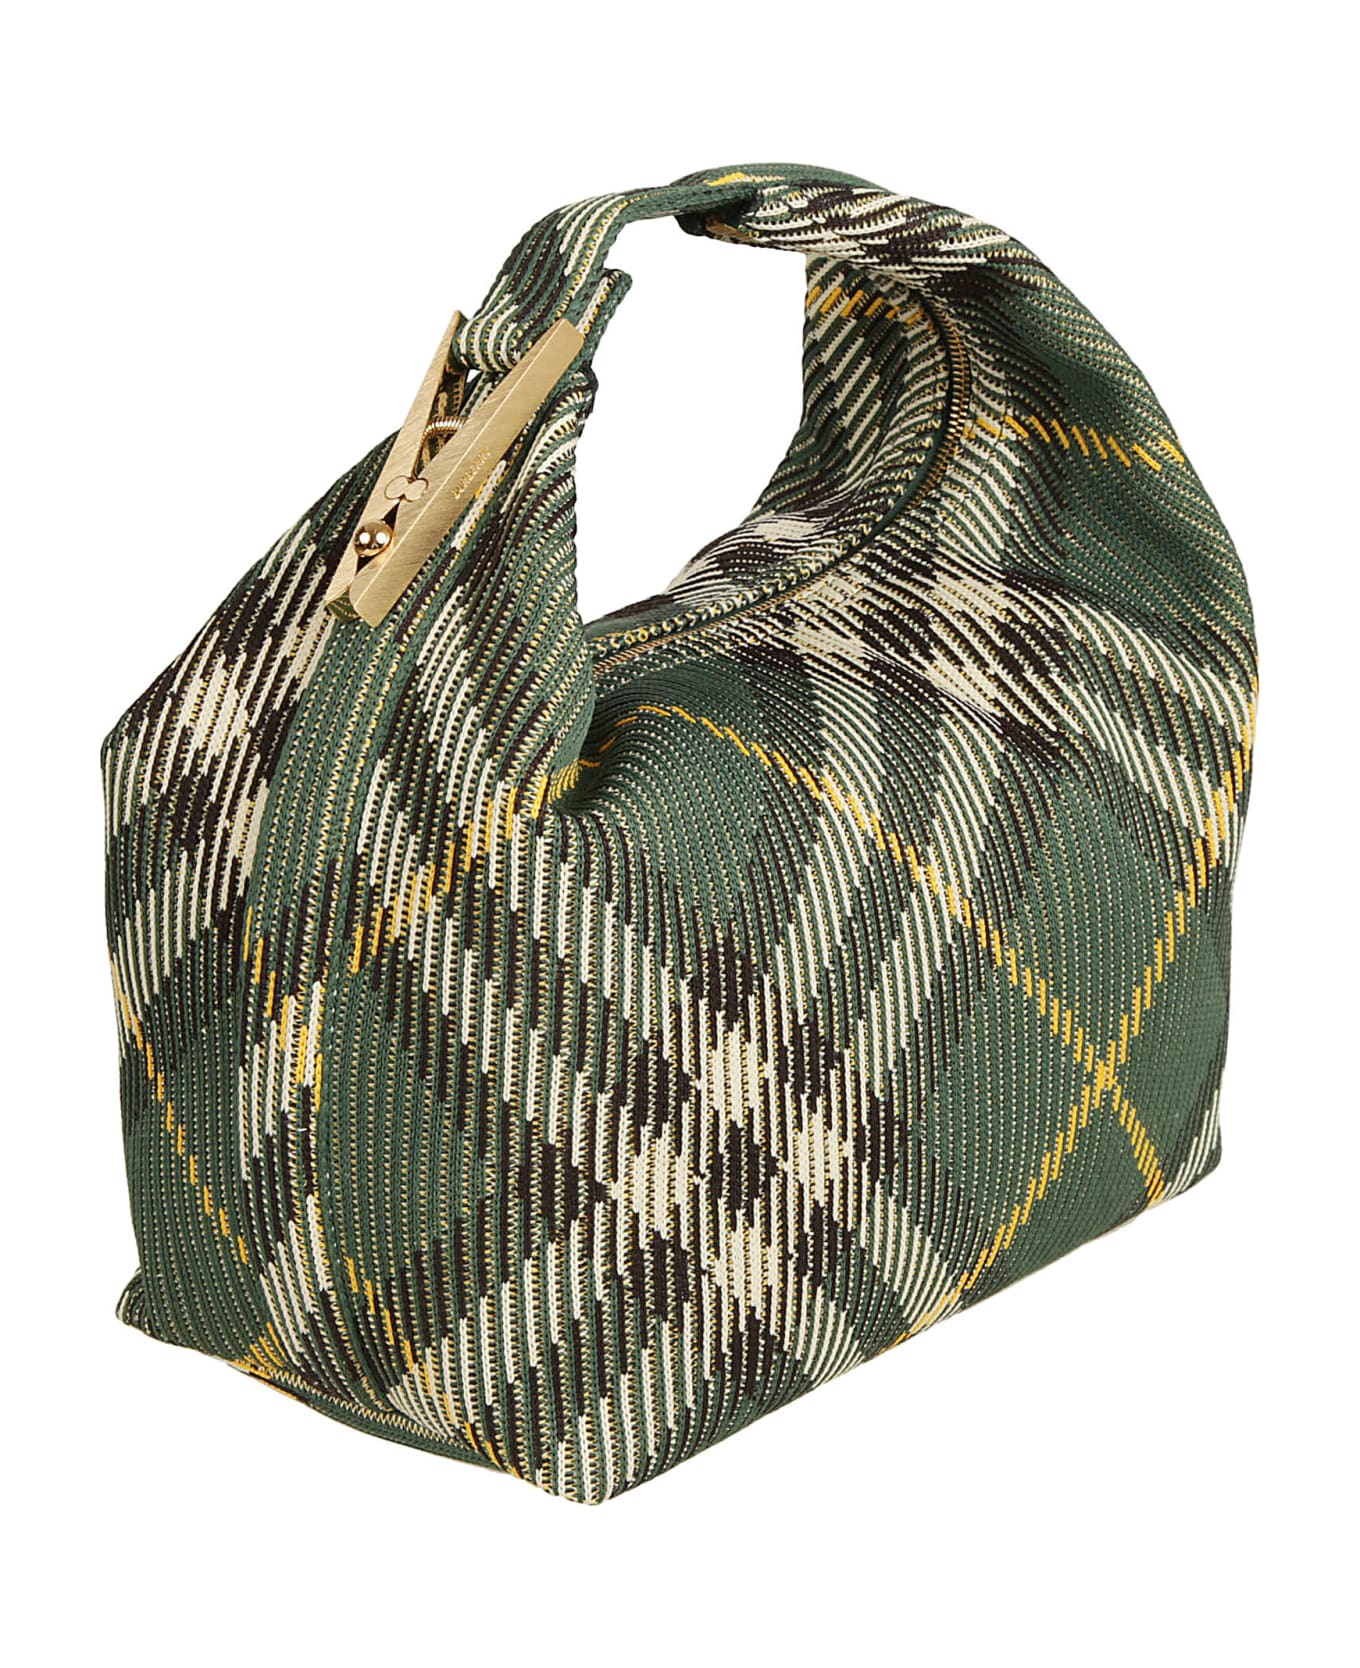 Burberry Check Patterned Hand Bag - Ivy